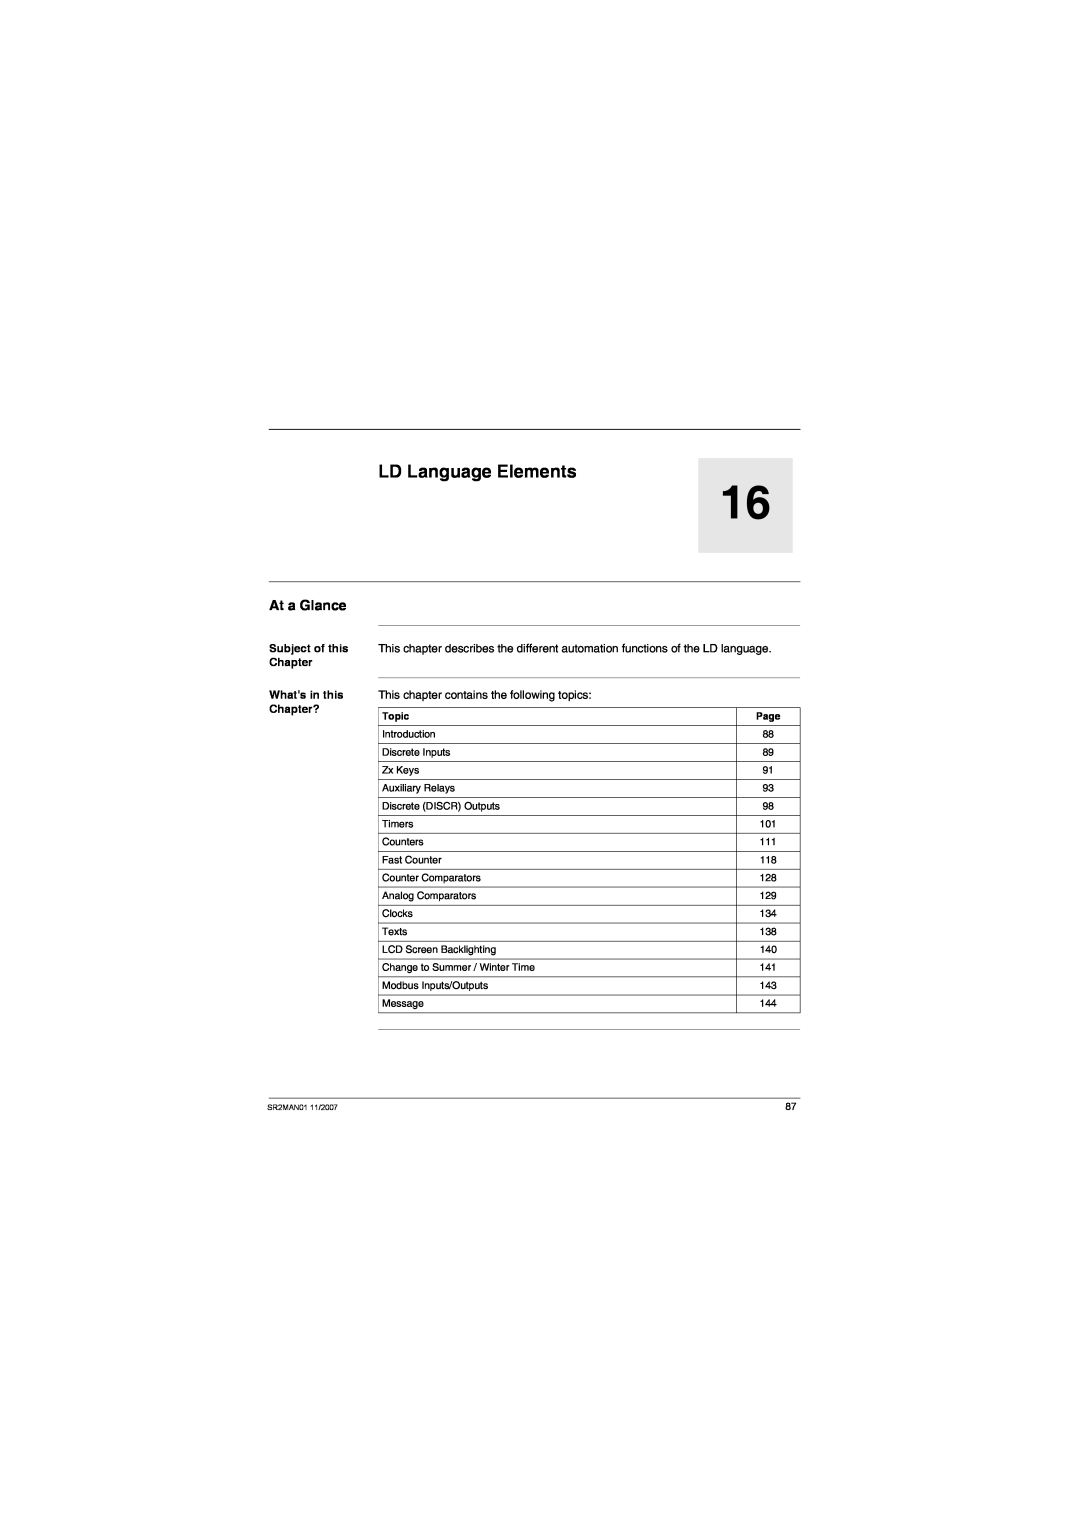 Schneider Electric SR2MAN01 LD Language Elements, At a Glance, Subject of this Chapter Whats in this Chapter?, Topic, Page 